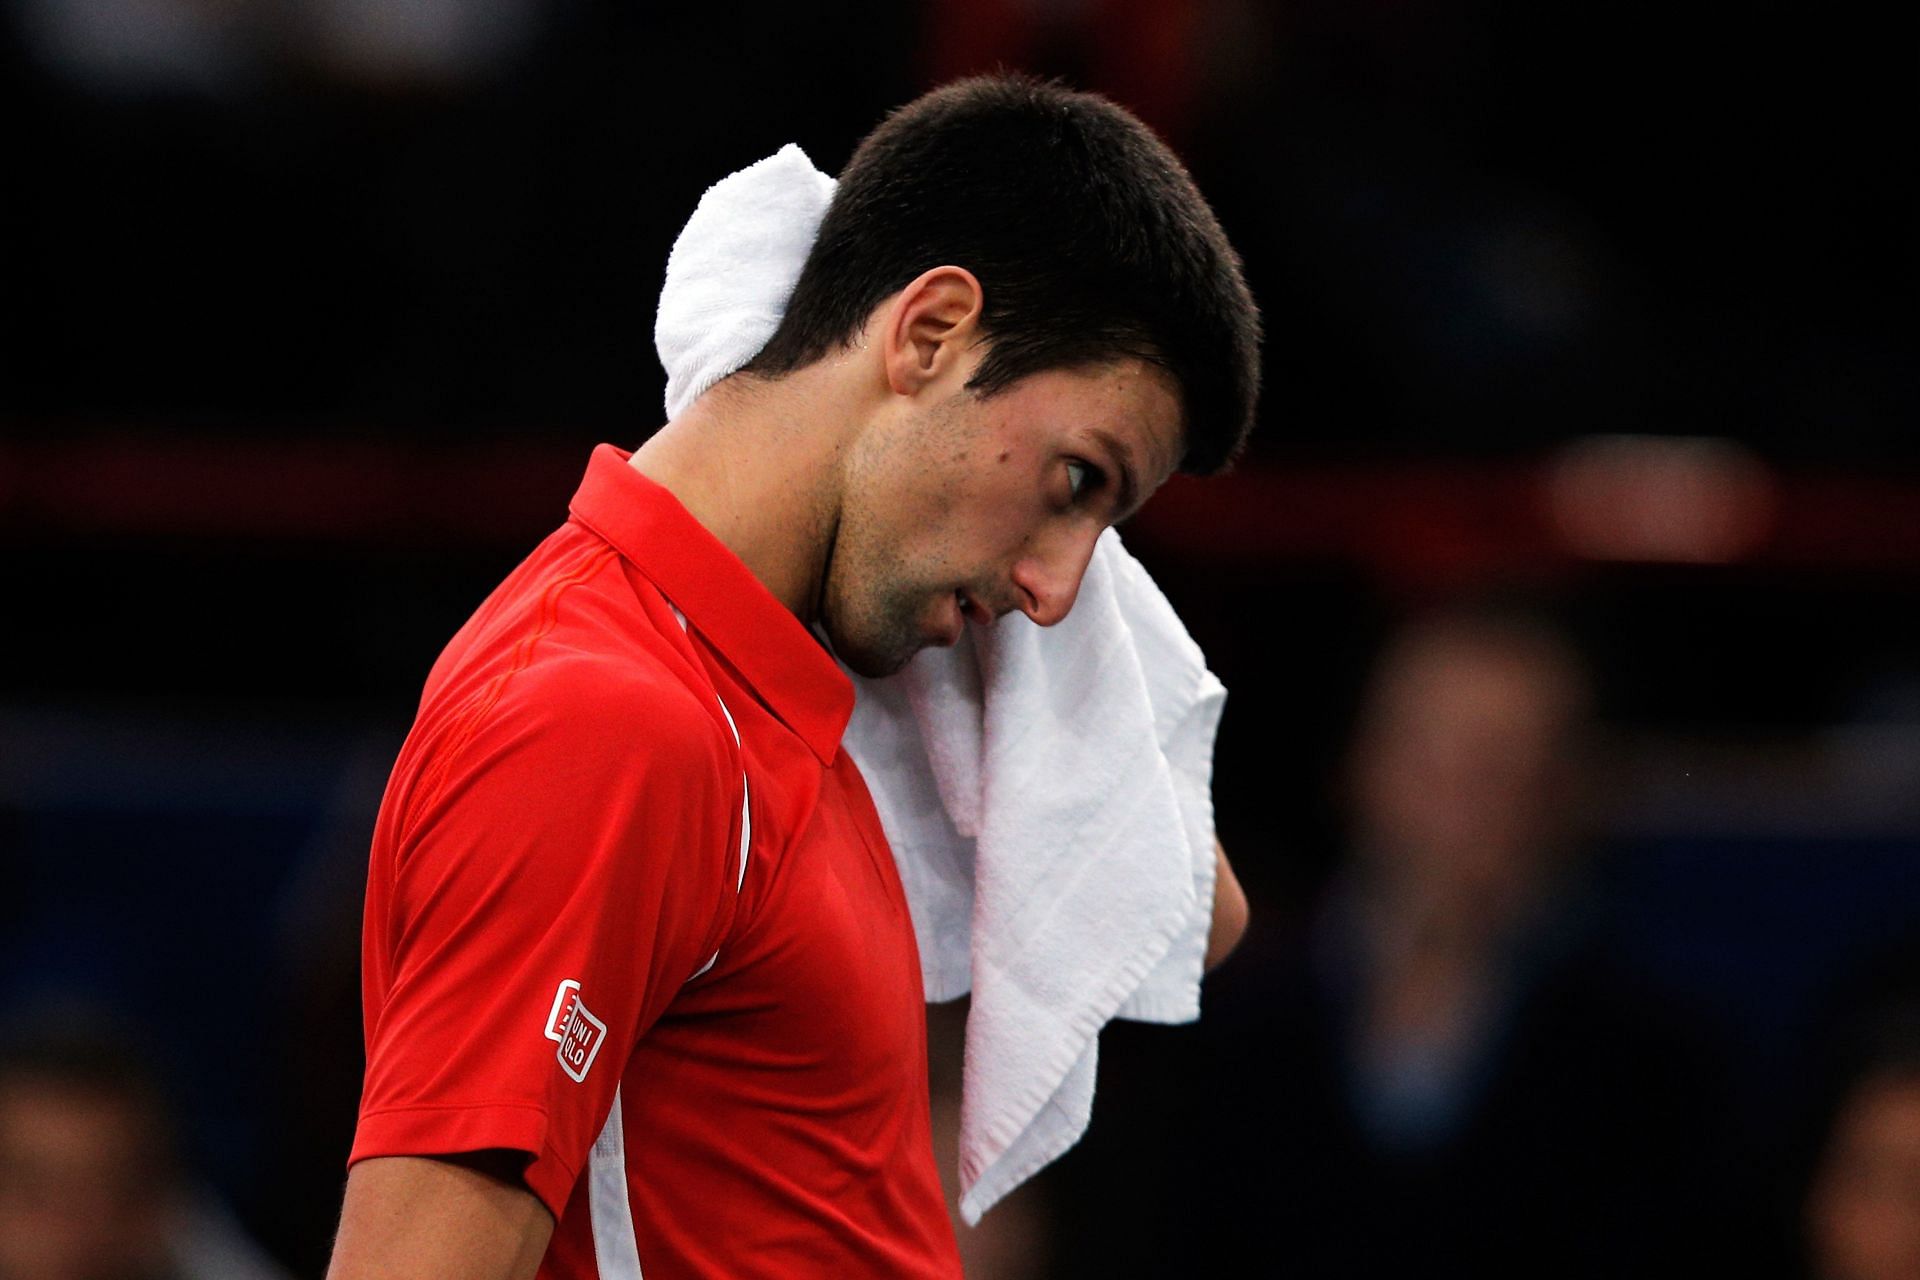 Novak Djokovic could miss the 2022 US Open